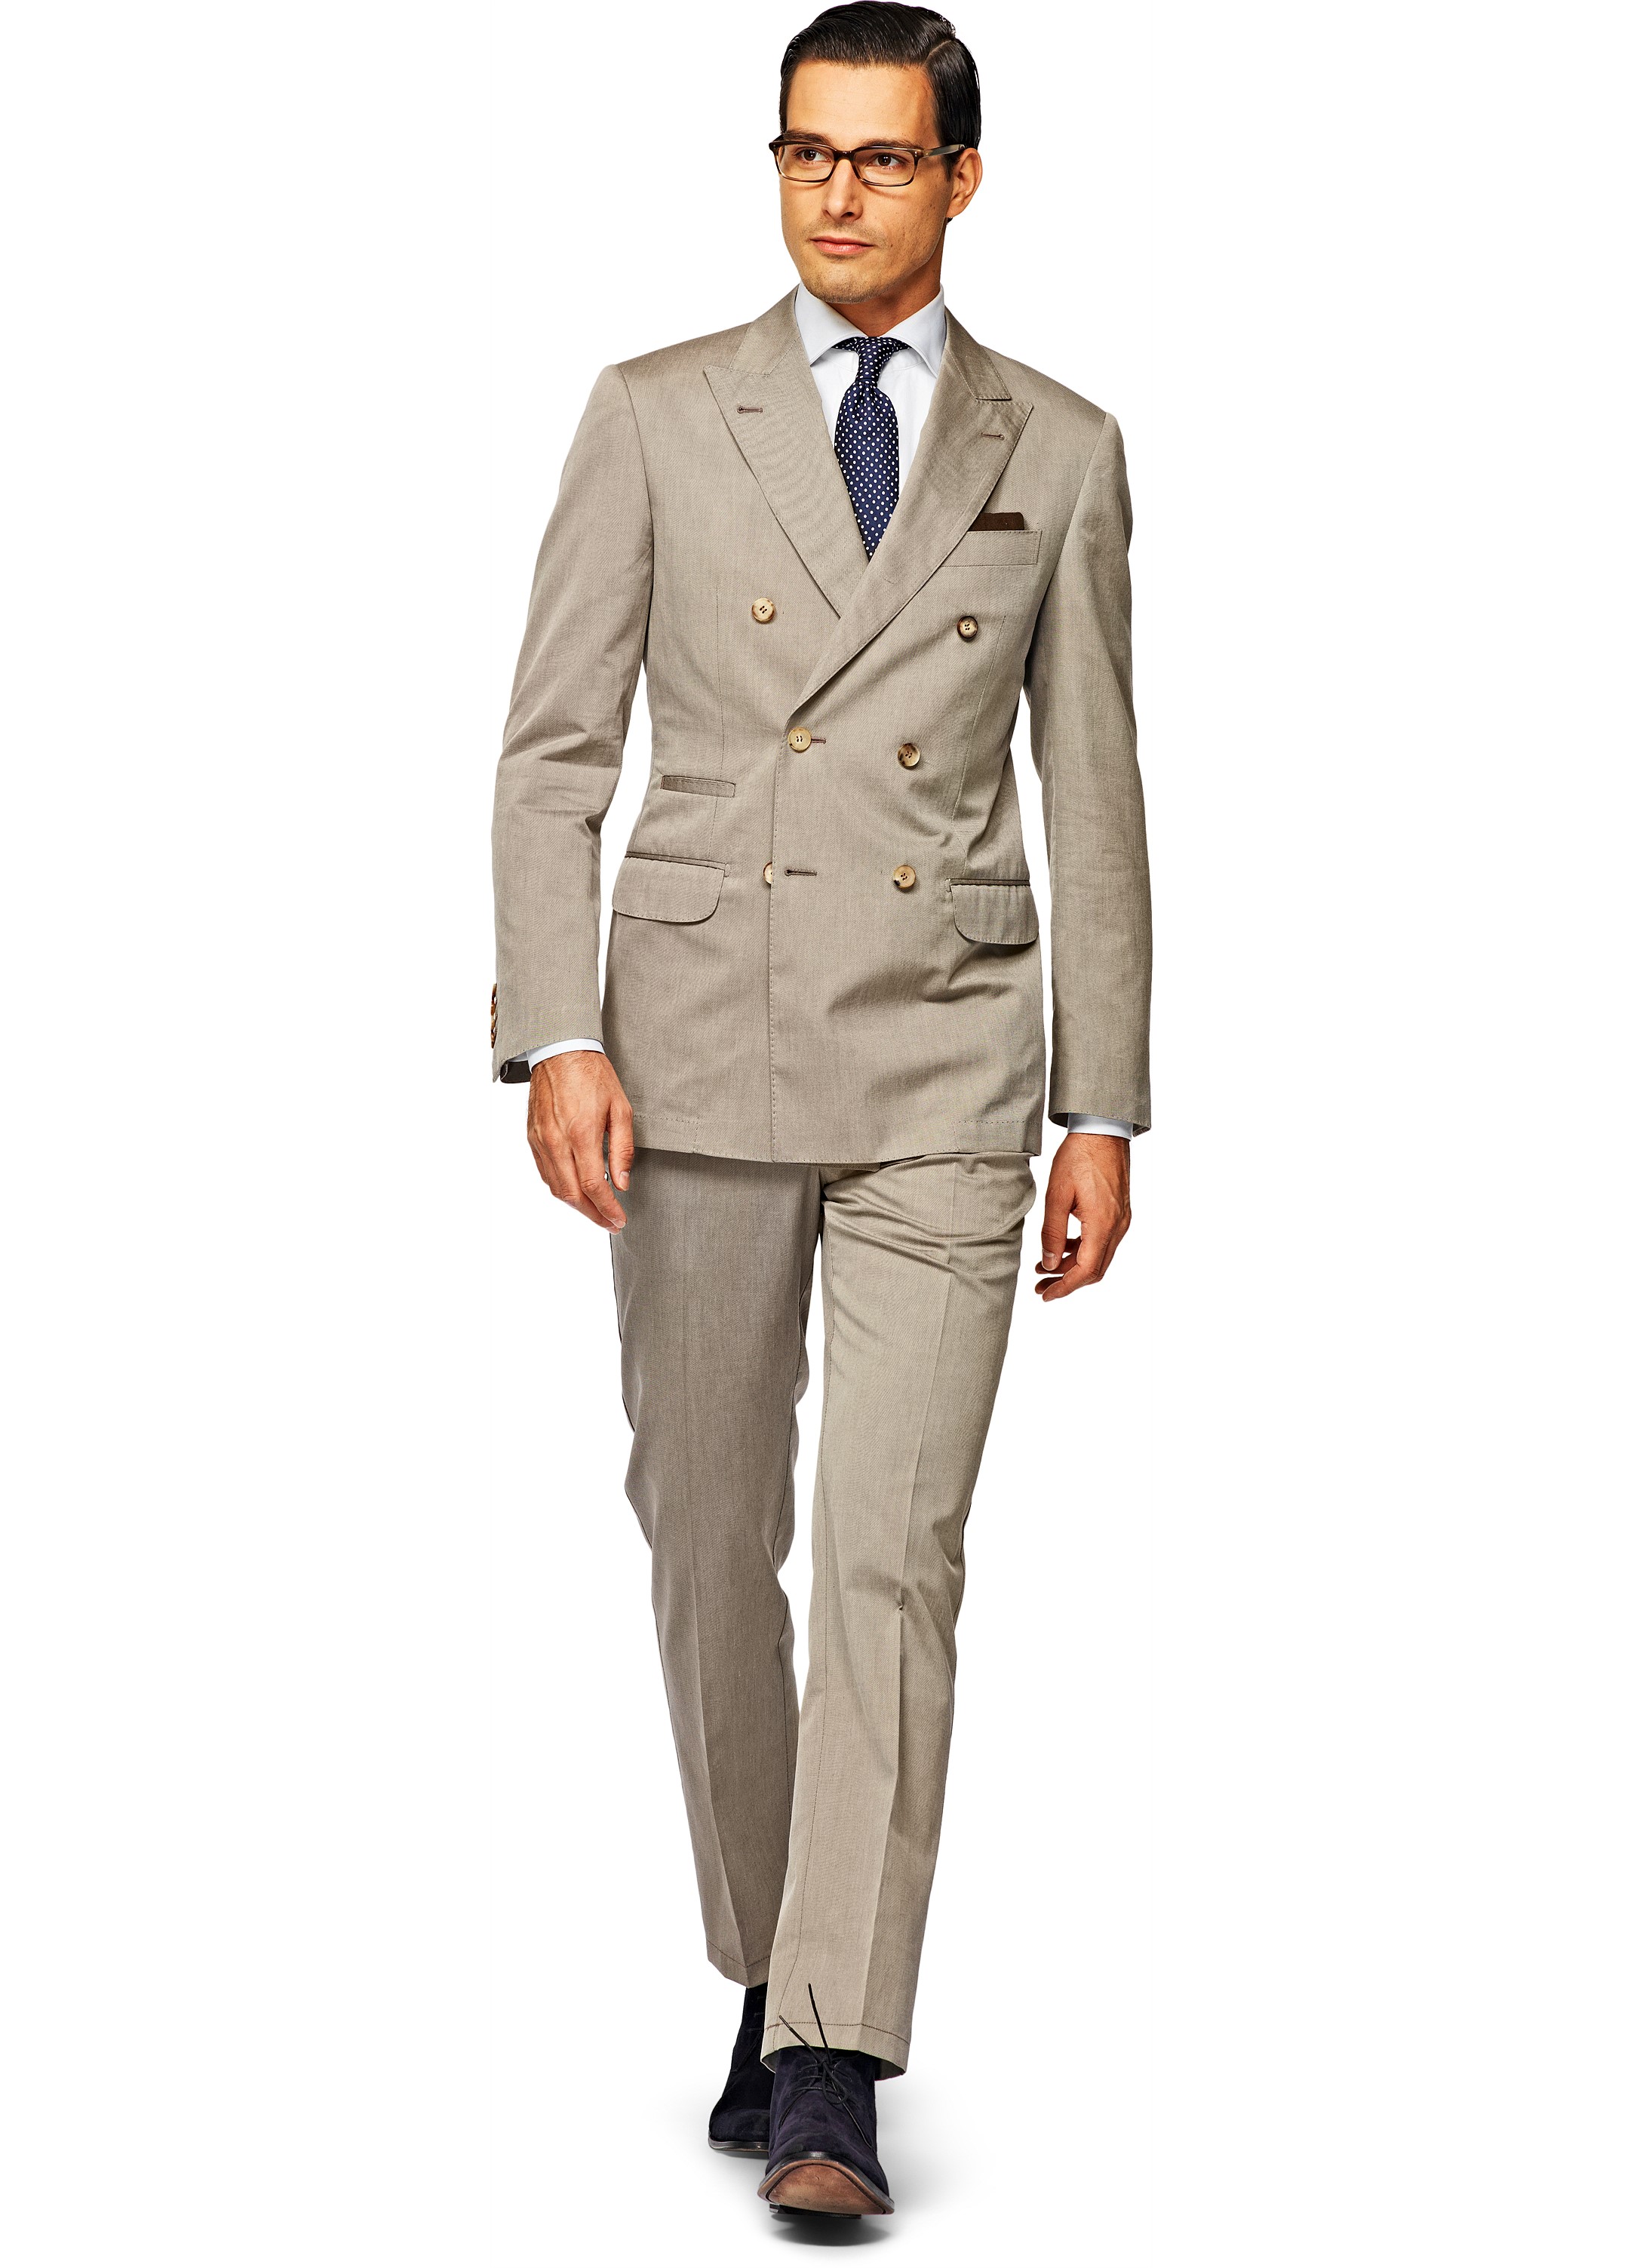 Suit_Light_Brown_Plain_Double_Breasted_P3298